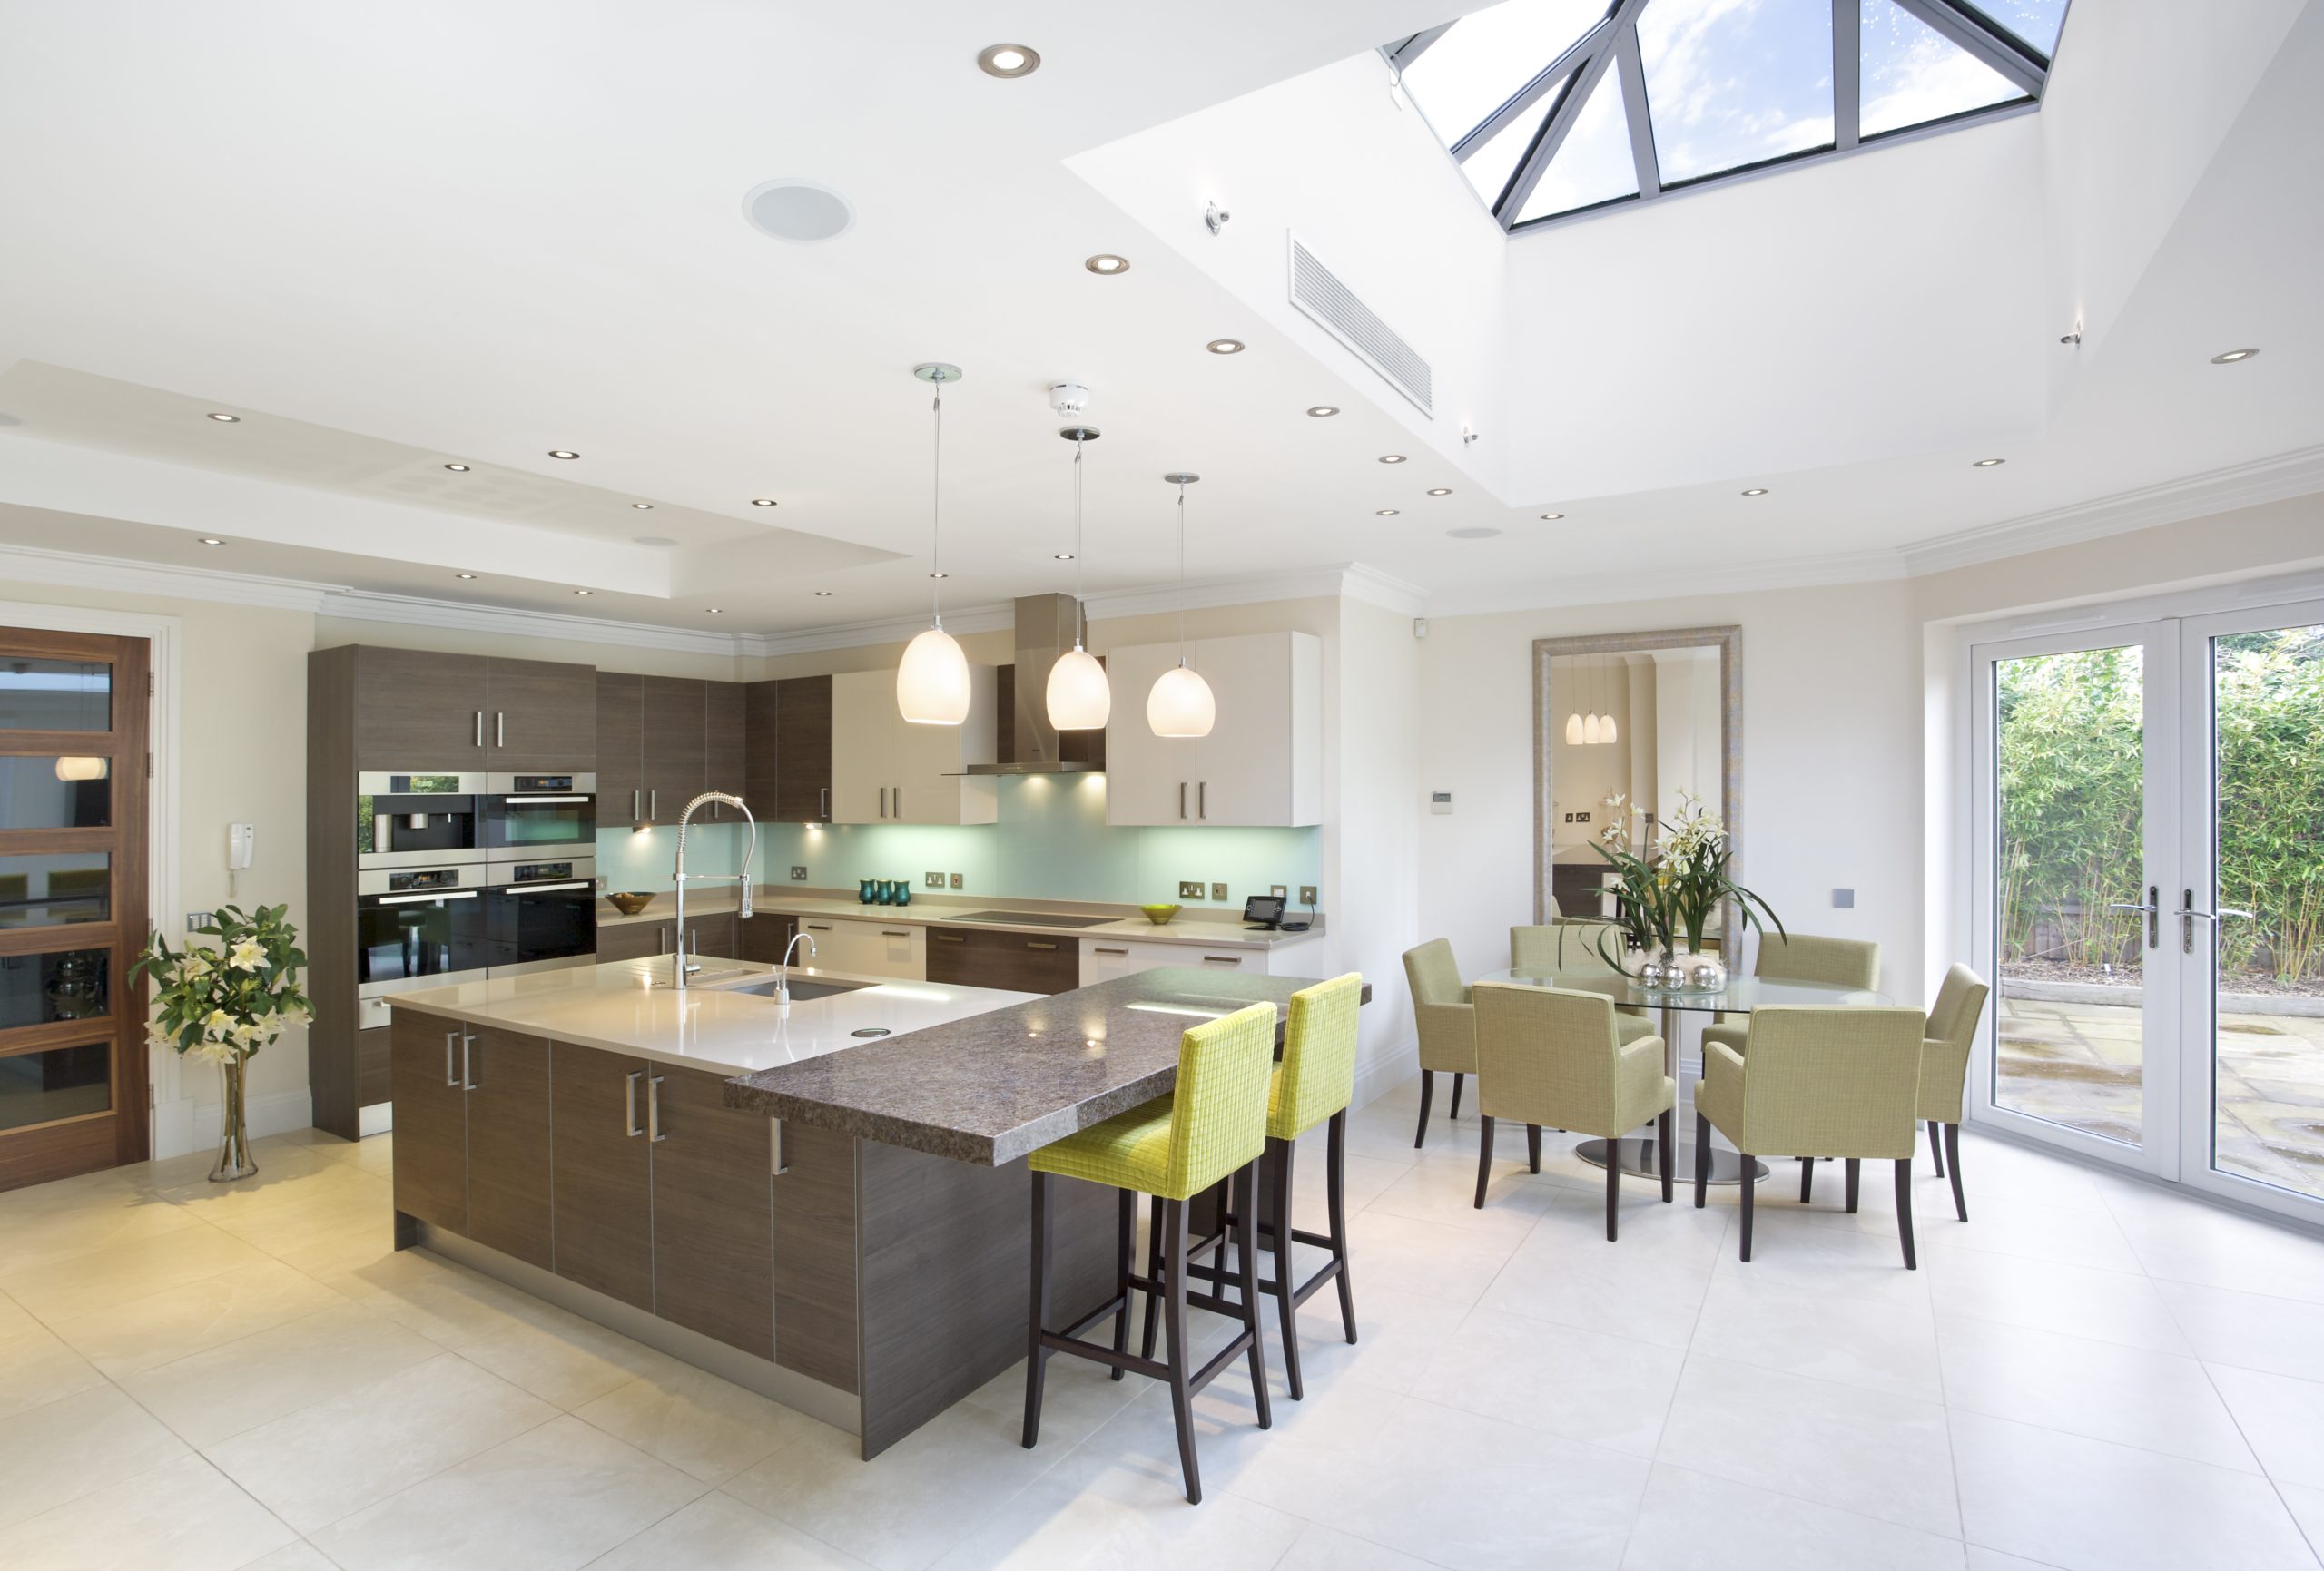 a large kitchen with light dining area in an expensive new home. An island at the centre of the kitchen has a breakfast bar attached and a sink with a large extendable tap and a "boiling-water-on-demand" tap with filtered water. Beneath a large skylight is a small table with six chairs. The kitchen decor is two toned with walnut panelling and cream coloured tops and facias.